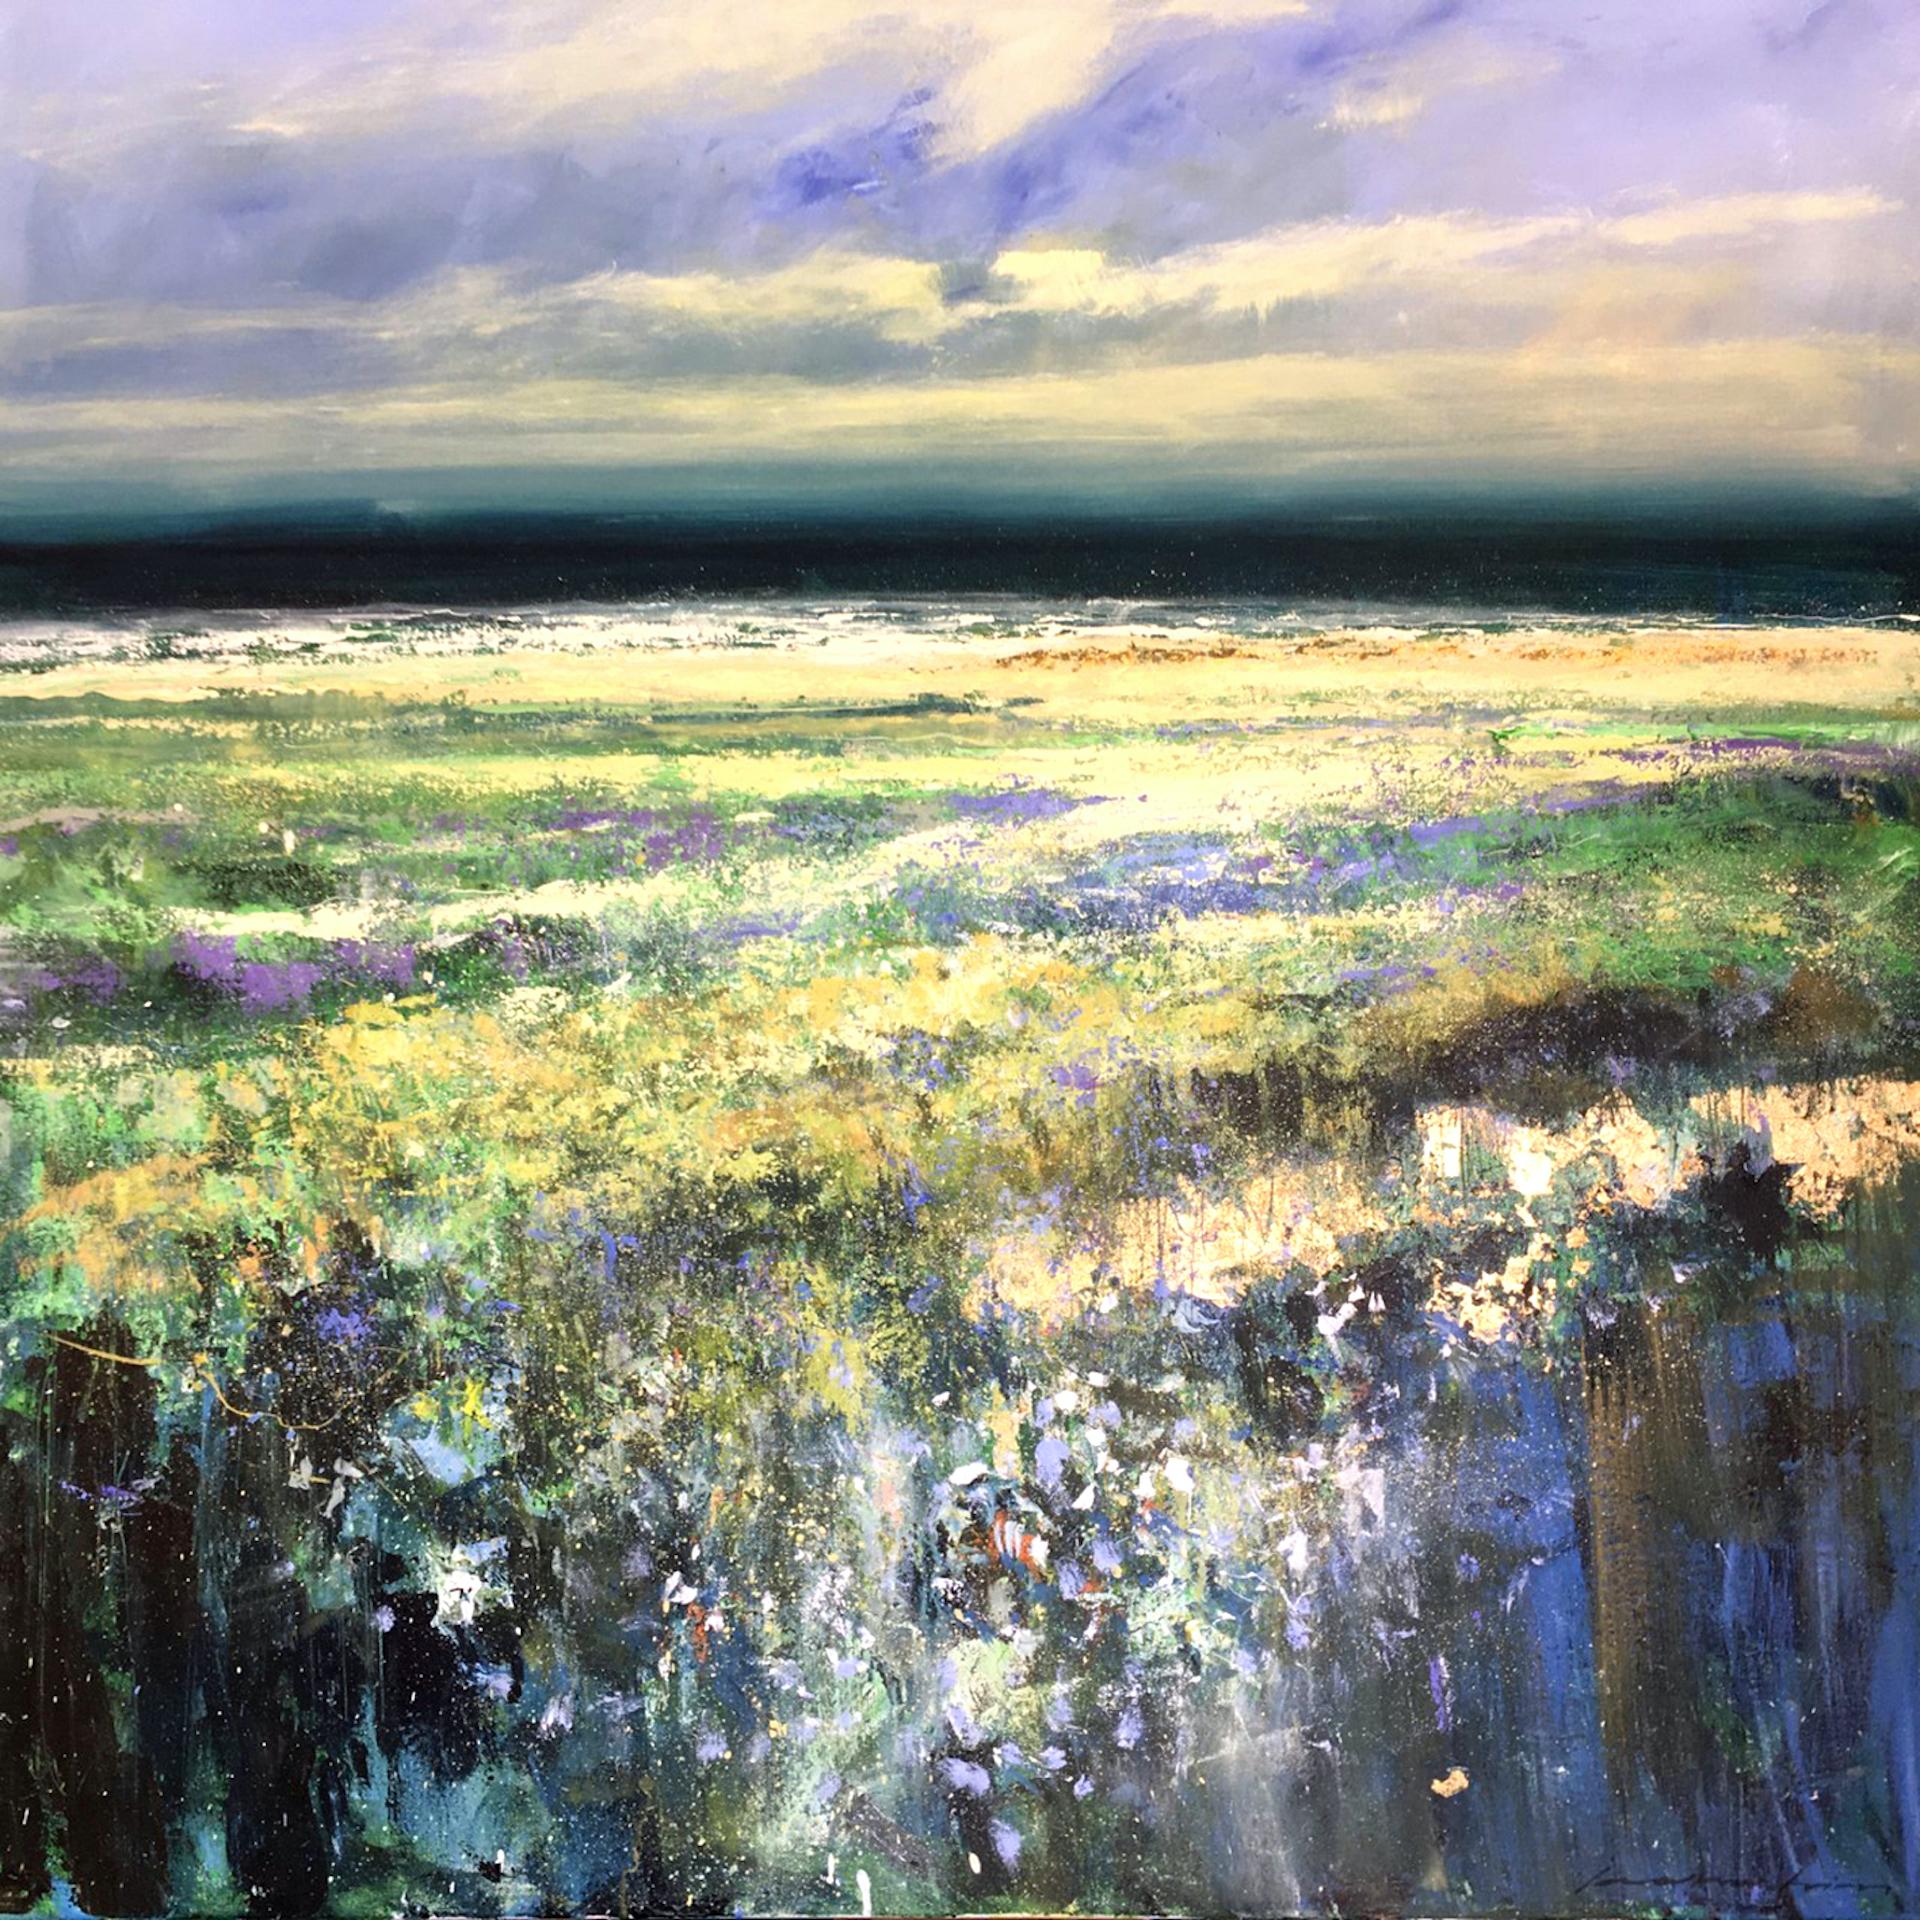 Sea Lavender by Jonathan Trim is a beautiful evocation of the Norfolk coast capturing the feeling of fresh sea air and the blooming of the Sea Lavender on this coast. The work is unframed on a gallery wrapped box canvas and is ready to